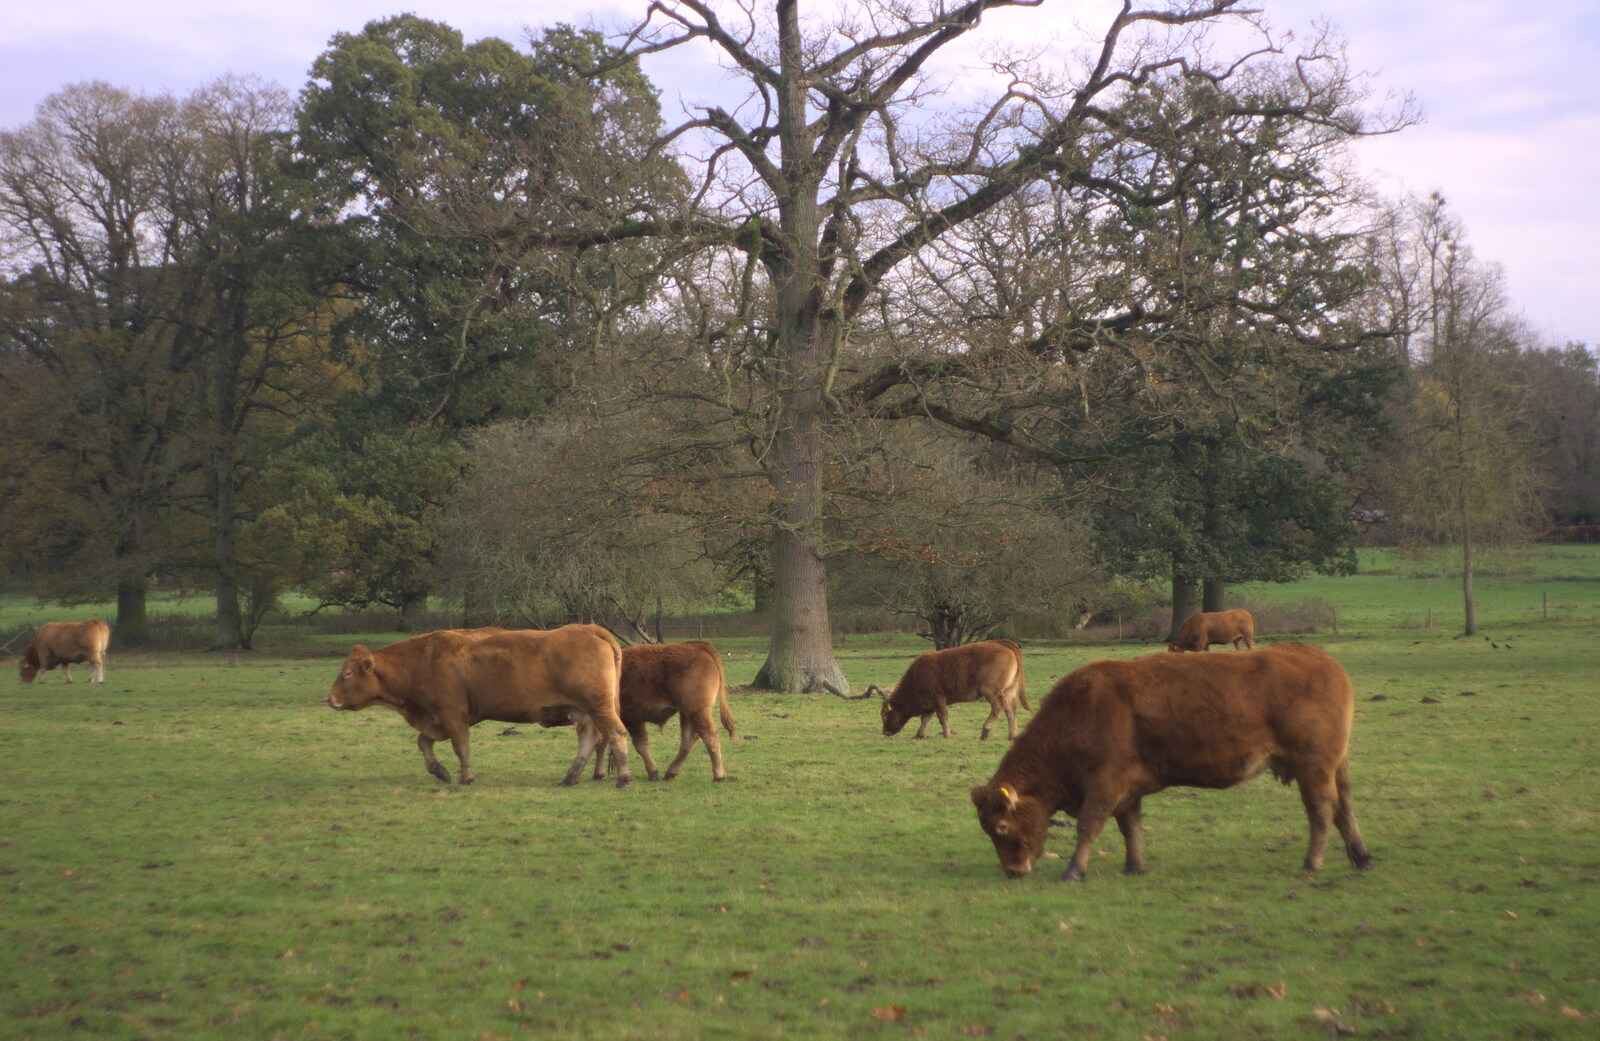 Grazing cows from Hot-tub Penthouse, Thornham Walks, and Building, London and Suffolk - 12th November 2015